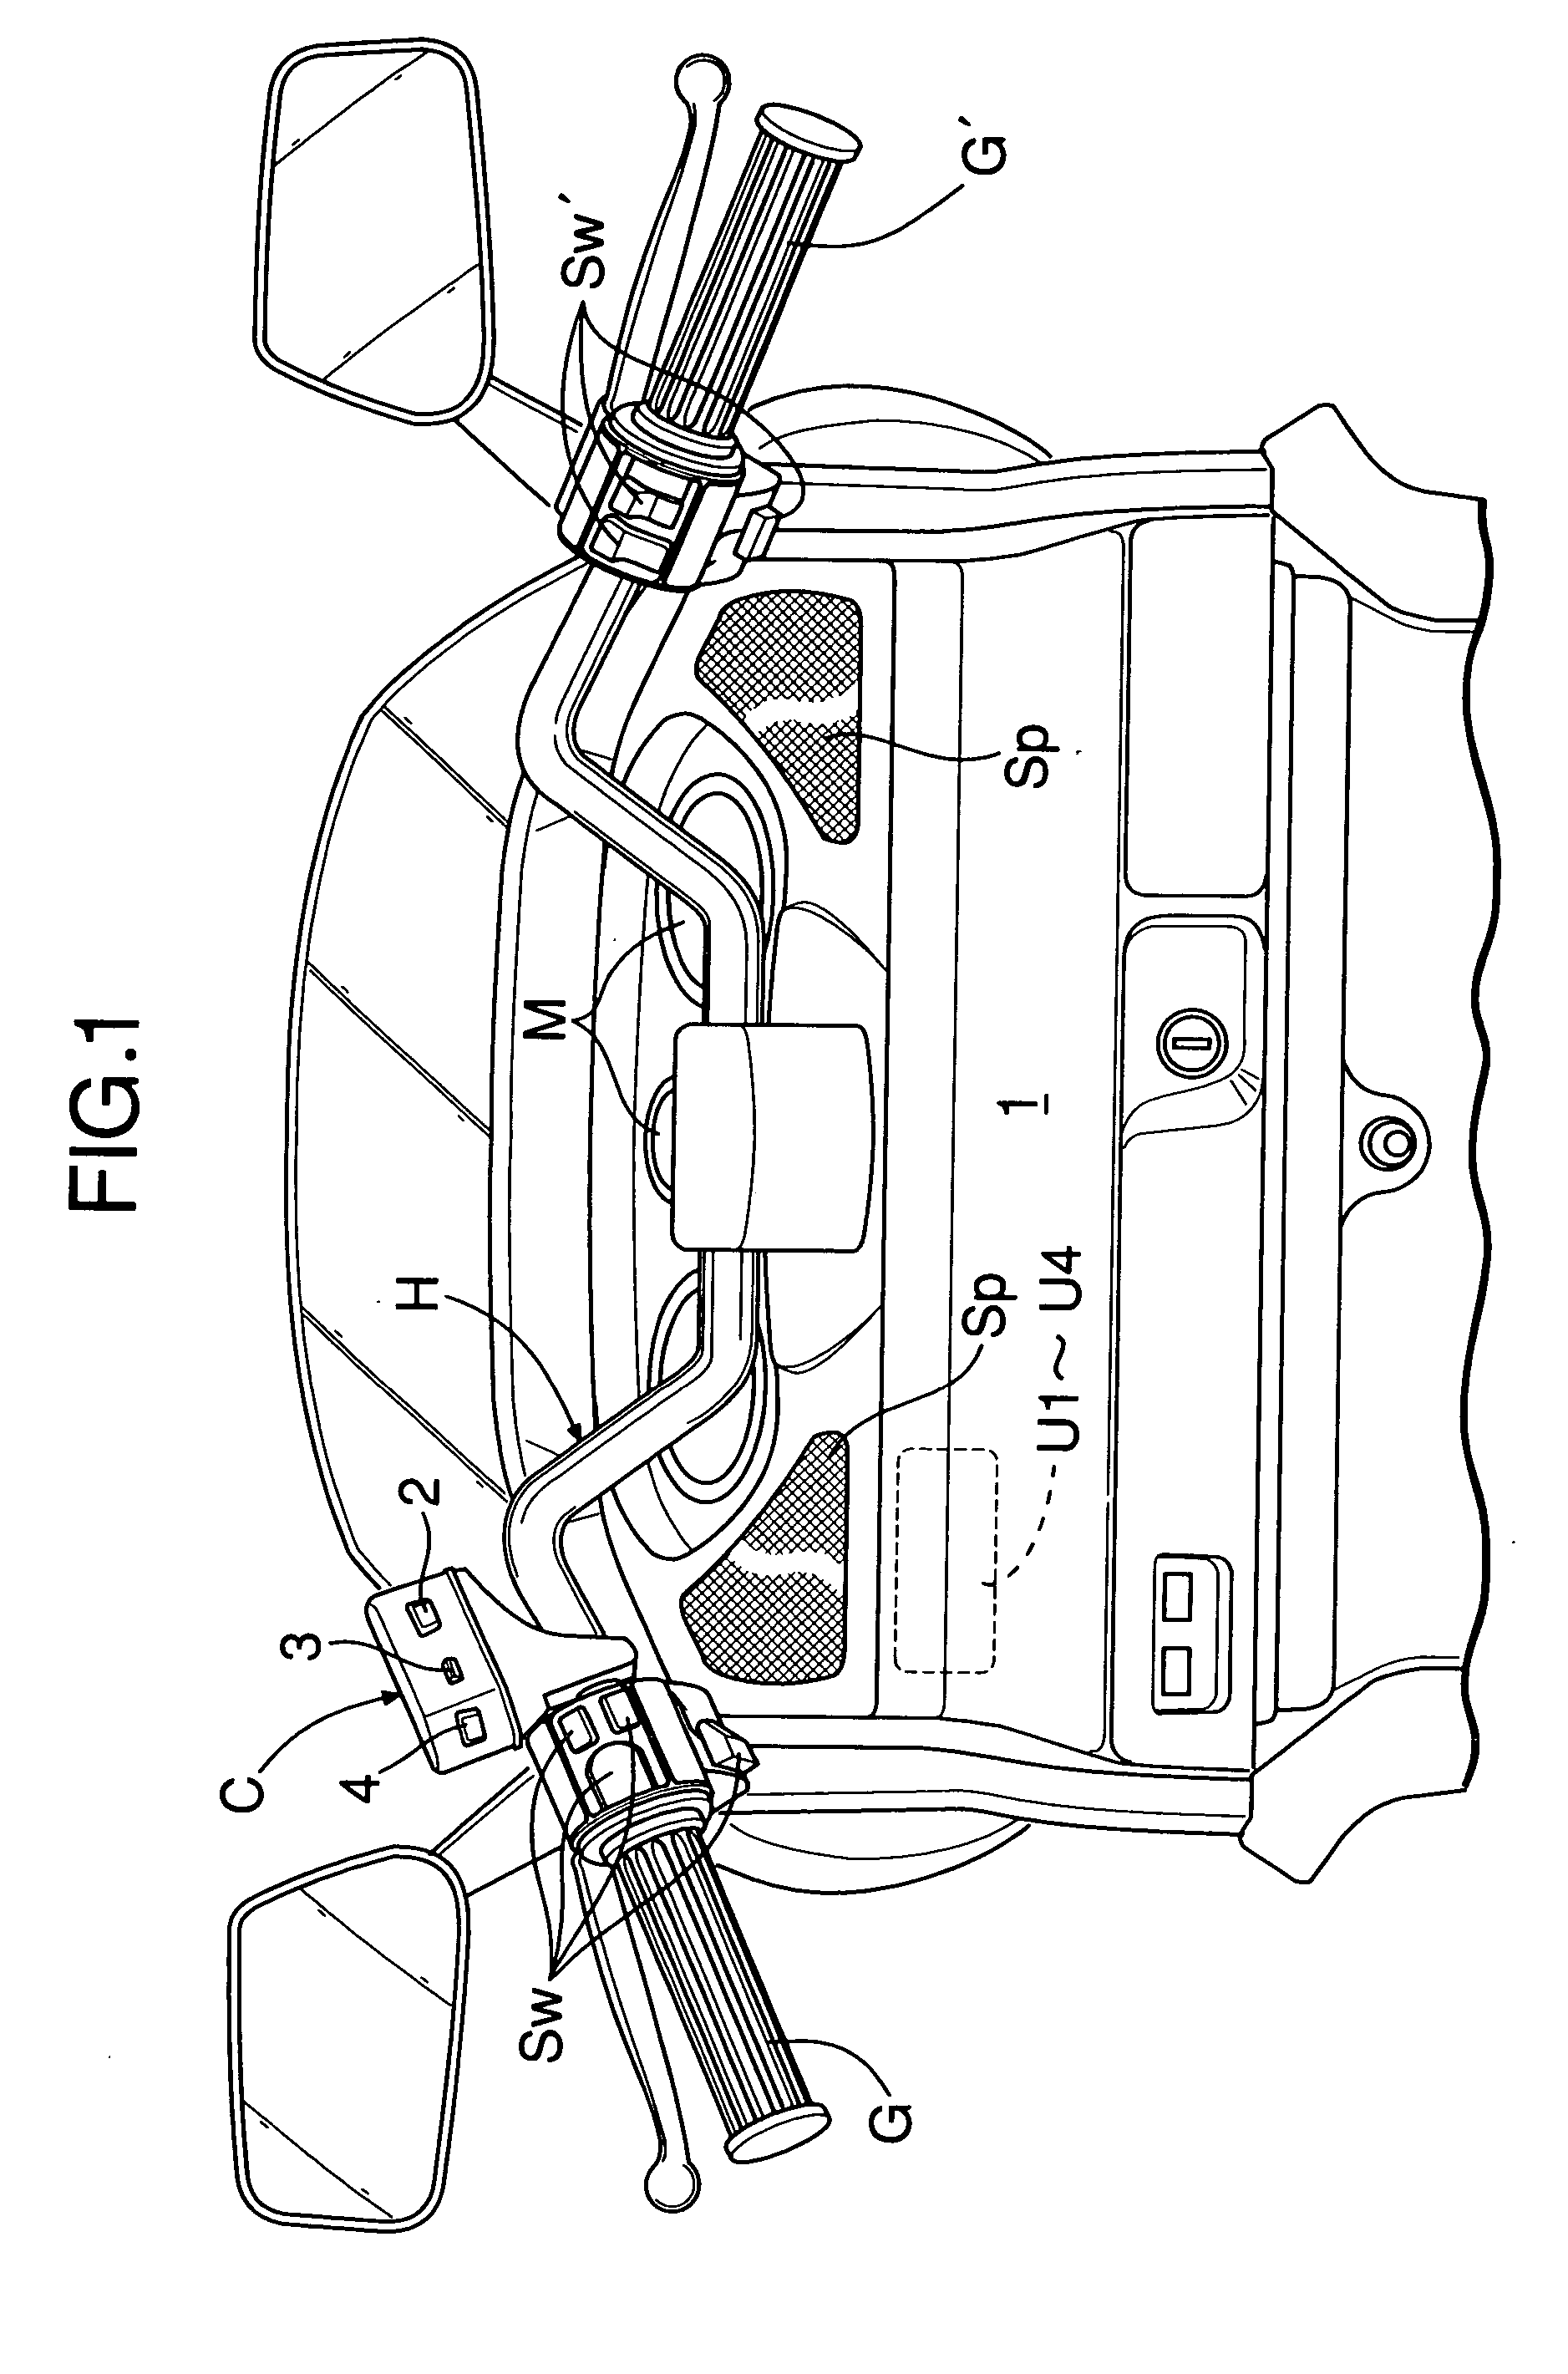 Set volume control device for on-vehicle audio system